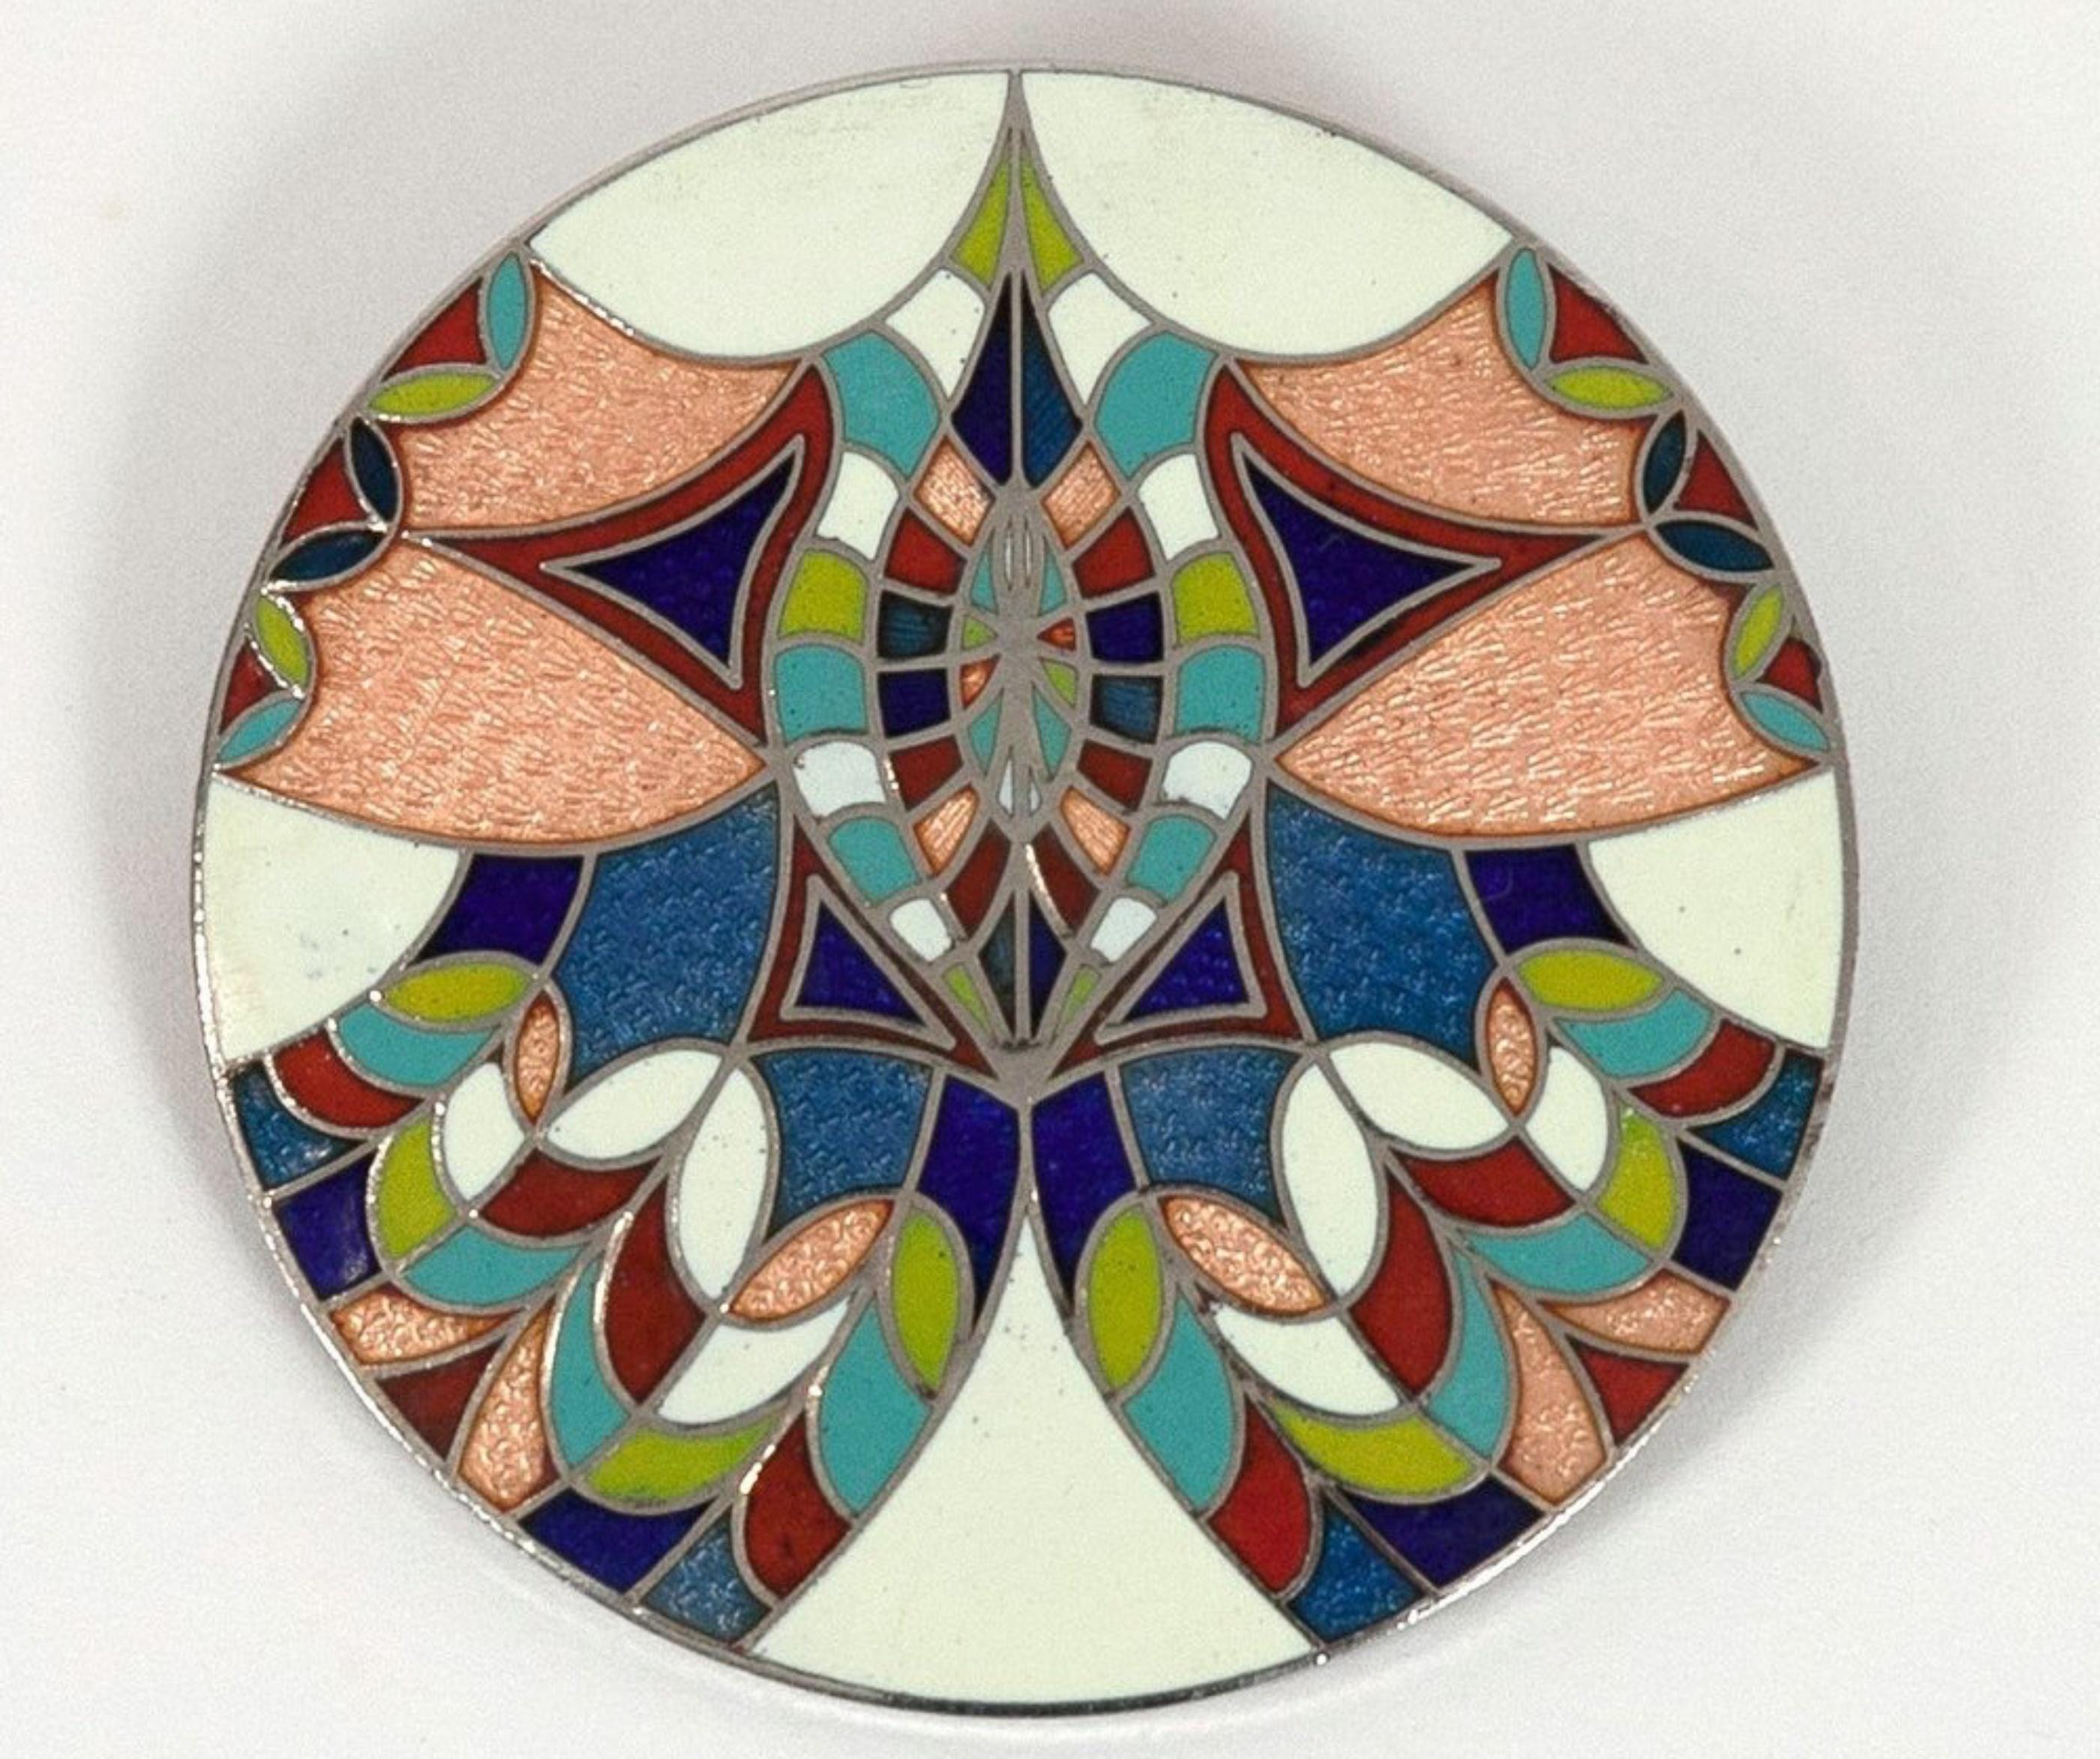 Hildegarde of Bingen, gorgeous Cloisonne Brooch, jewelry from The Dinner Party - Mixed Media Art by Judy Chicago